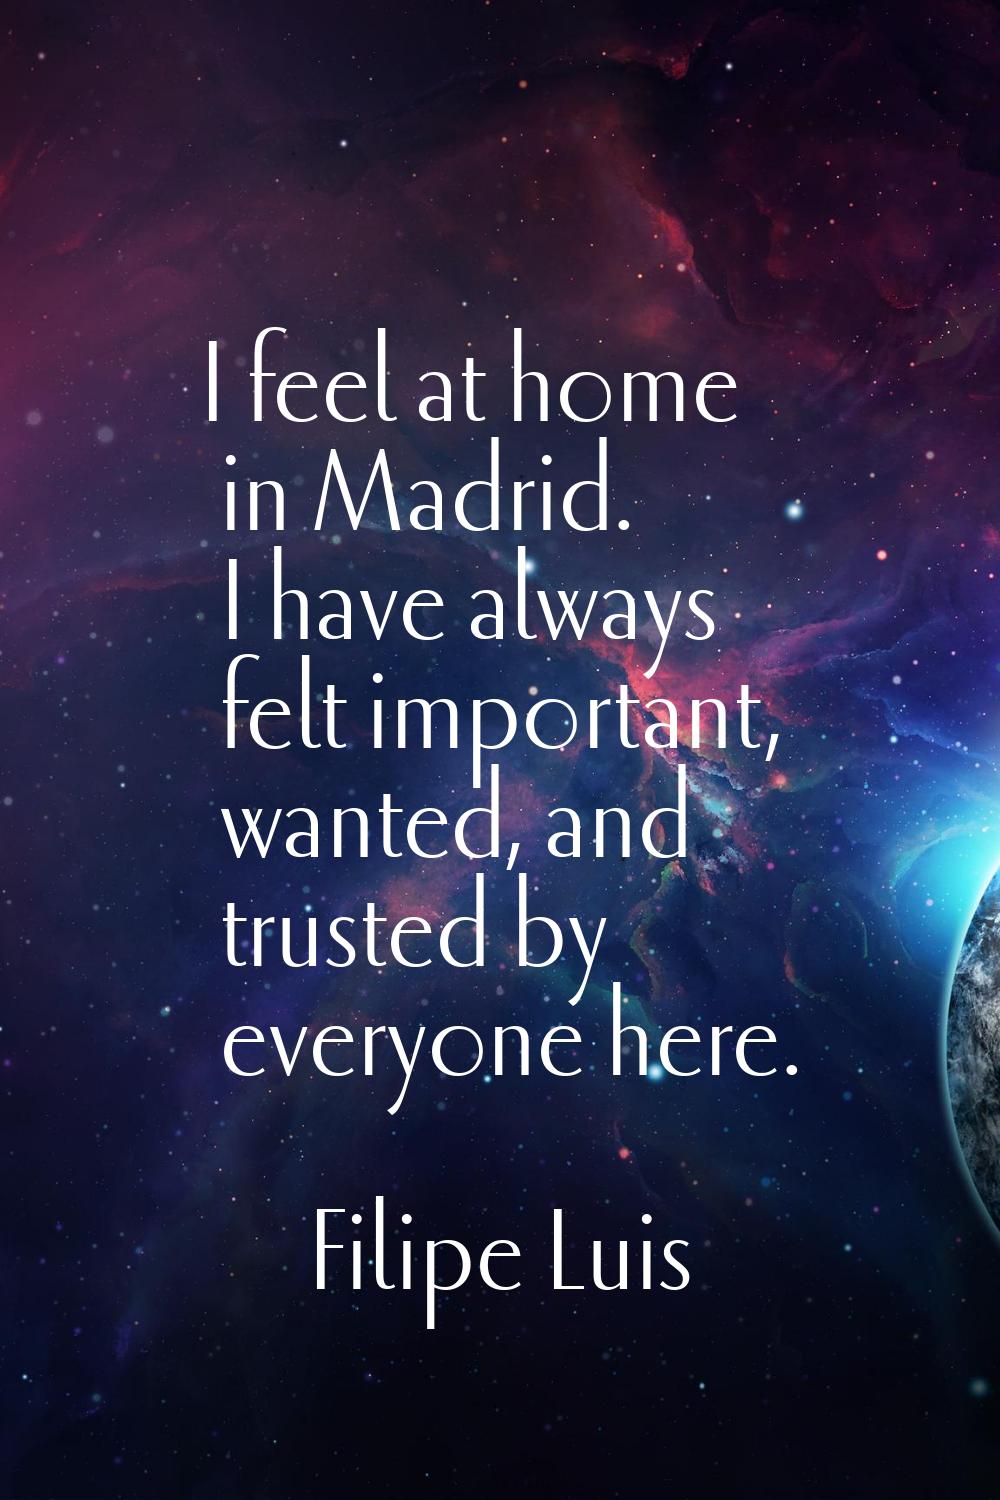 I feel at home in Madrid. I have always felt important, wanted, and trusted by everyone here.